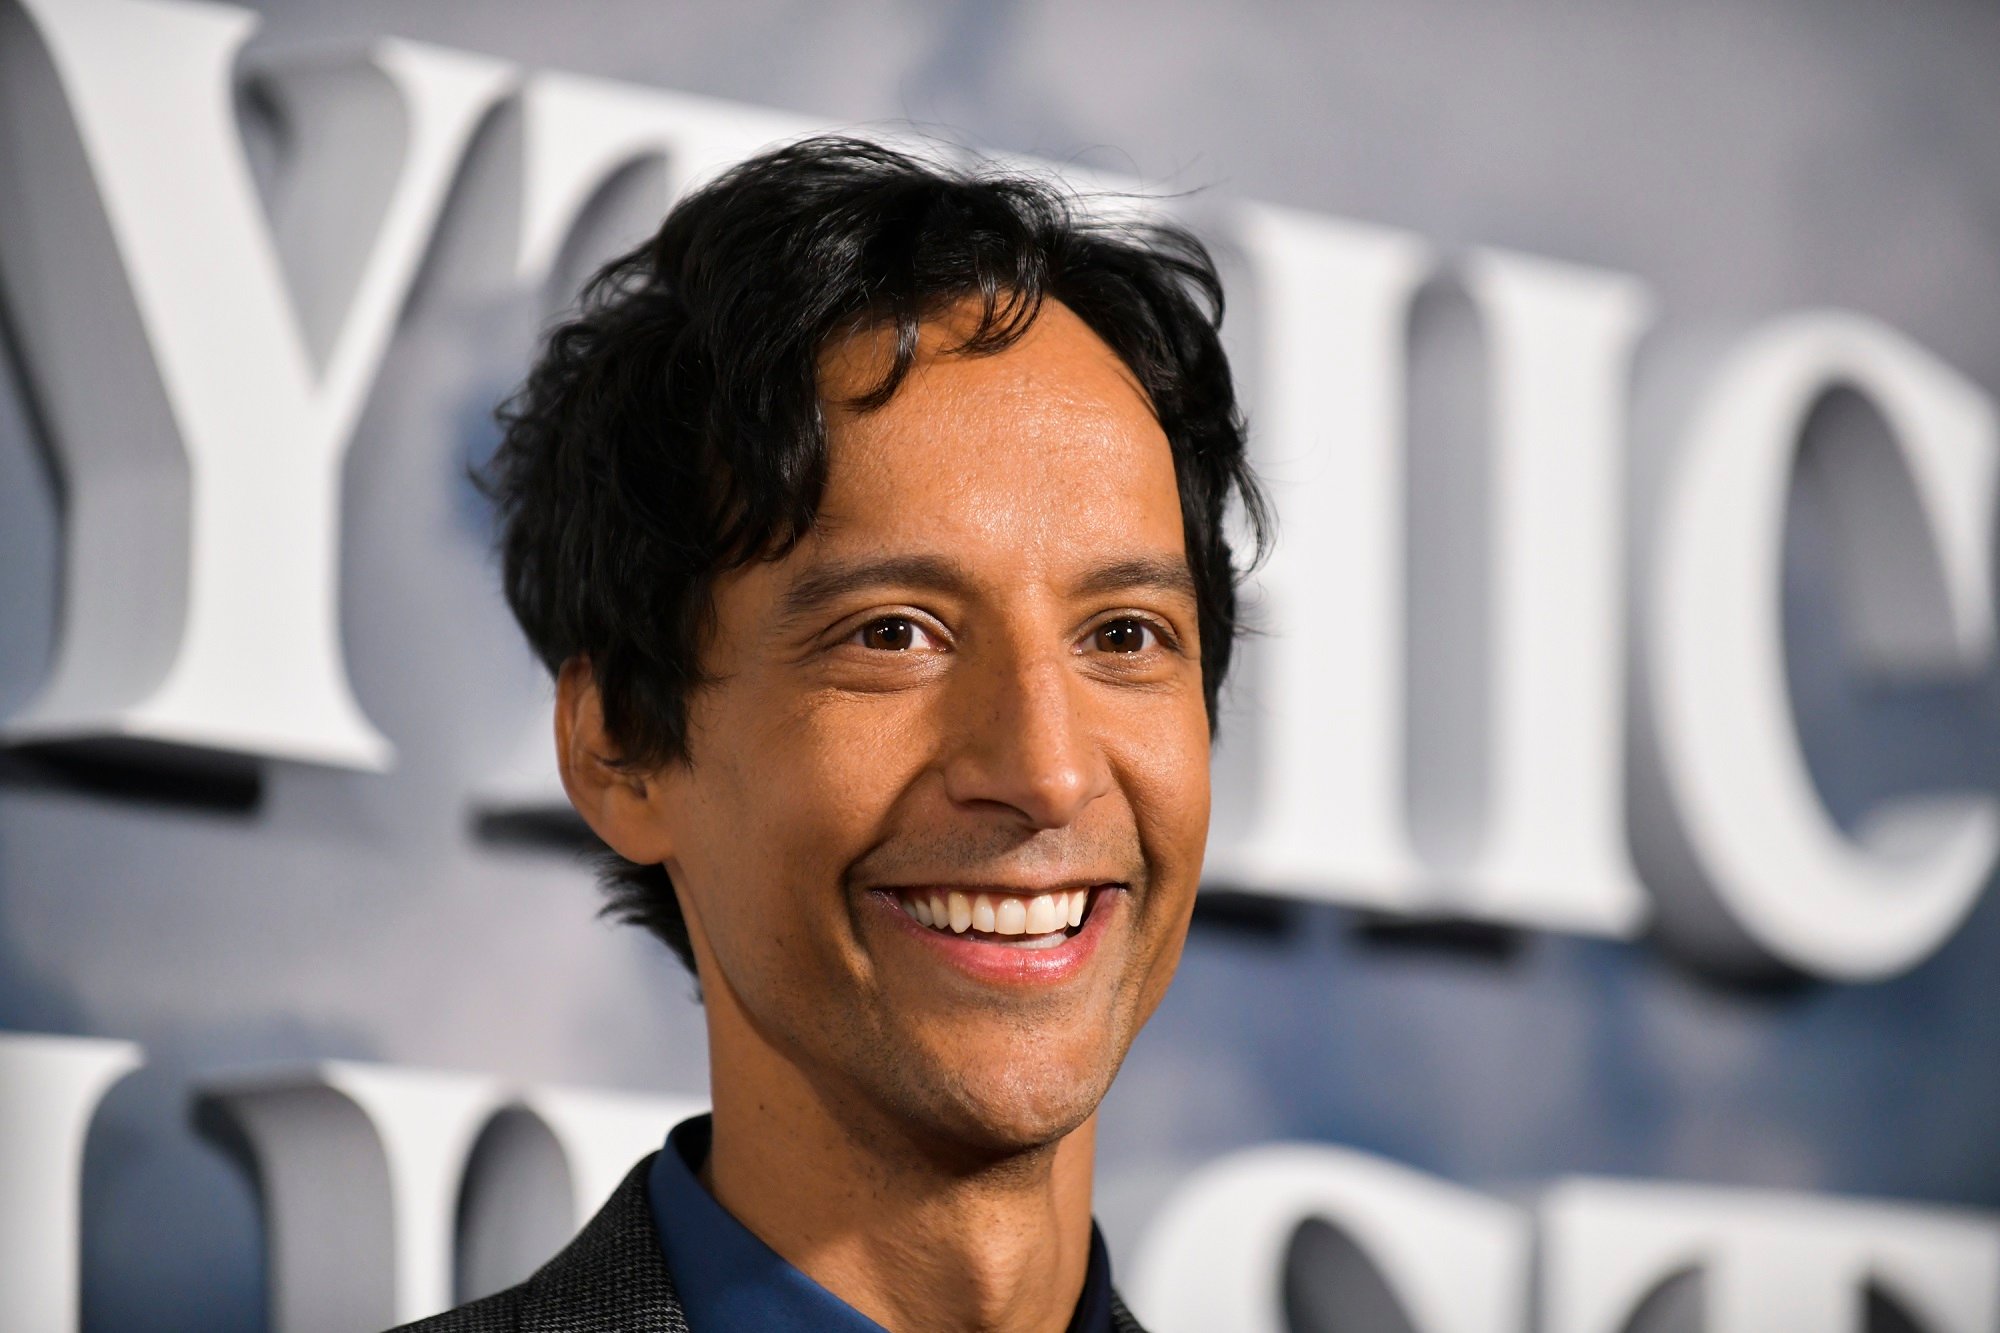 Danny Pudi attends the premiere of Apple TV+'s 'Mythic Quest: Raven's Banquet' on January 29, 2020 in Los Angeles, California. 